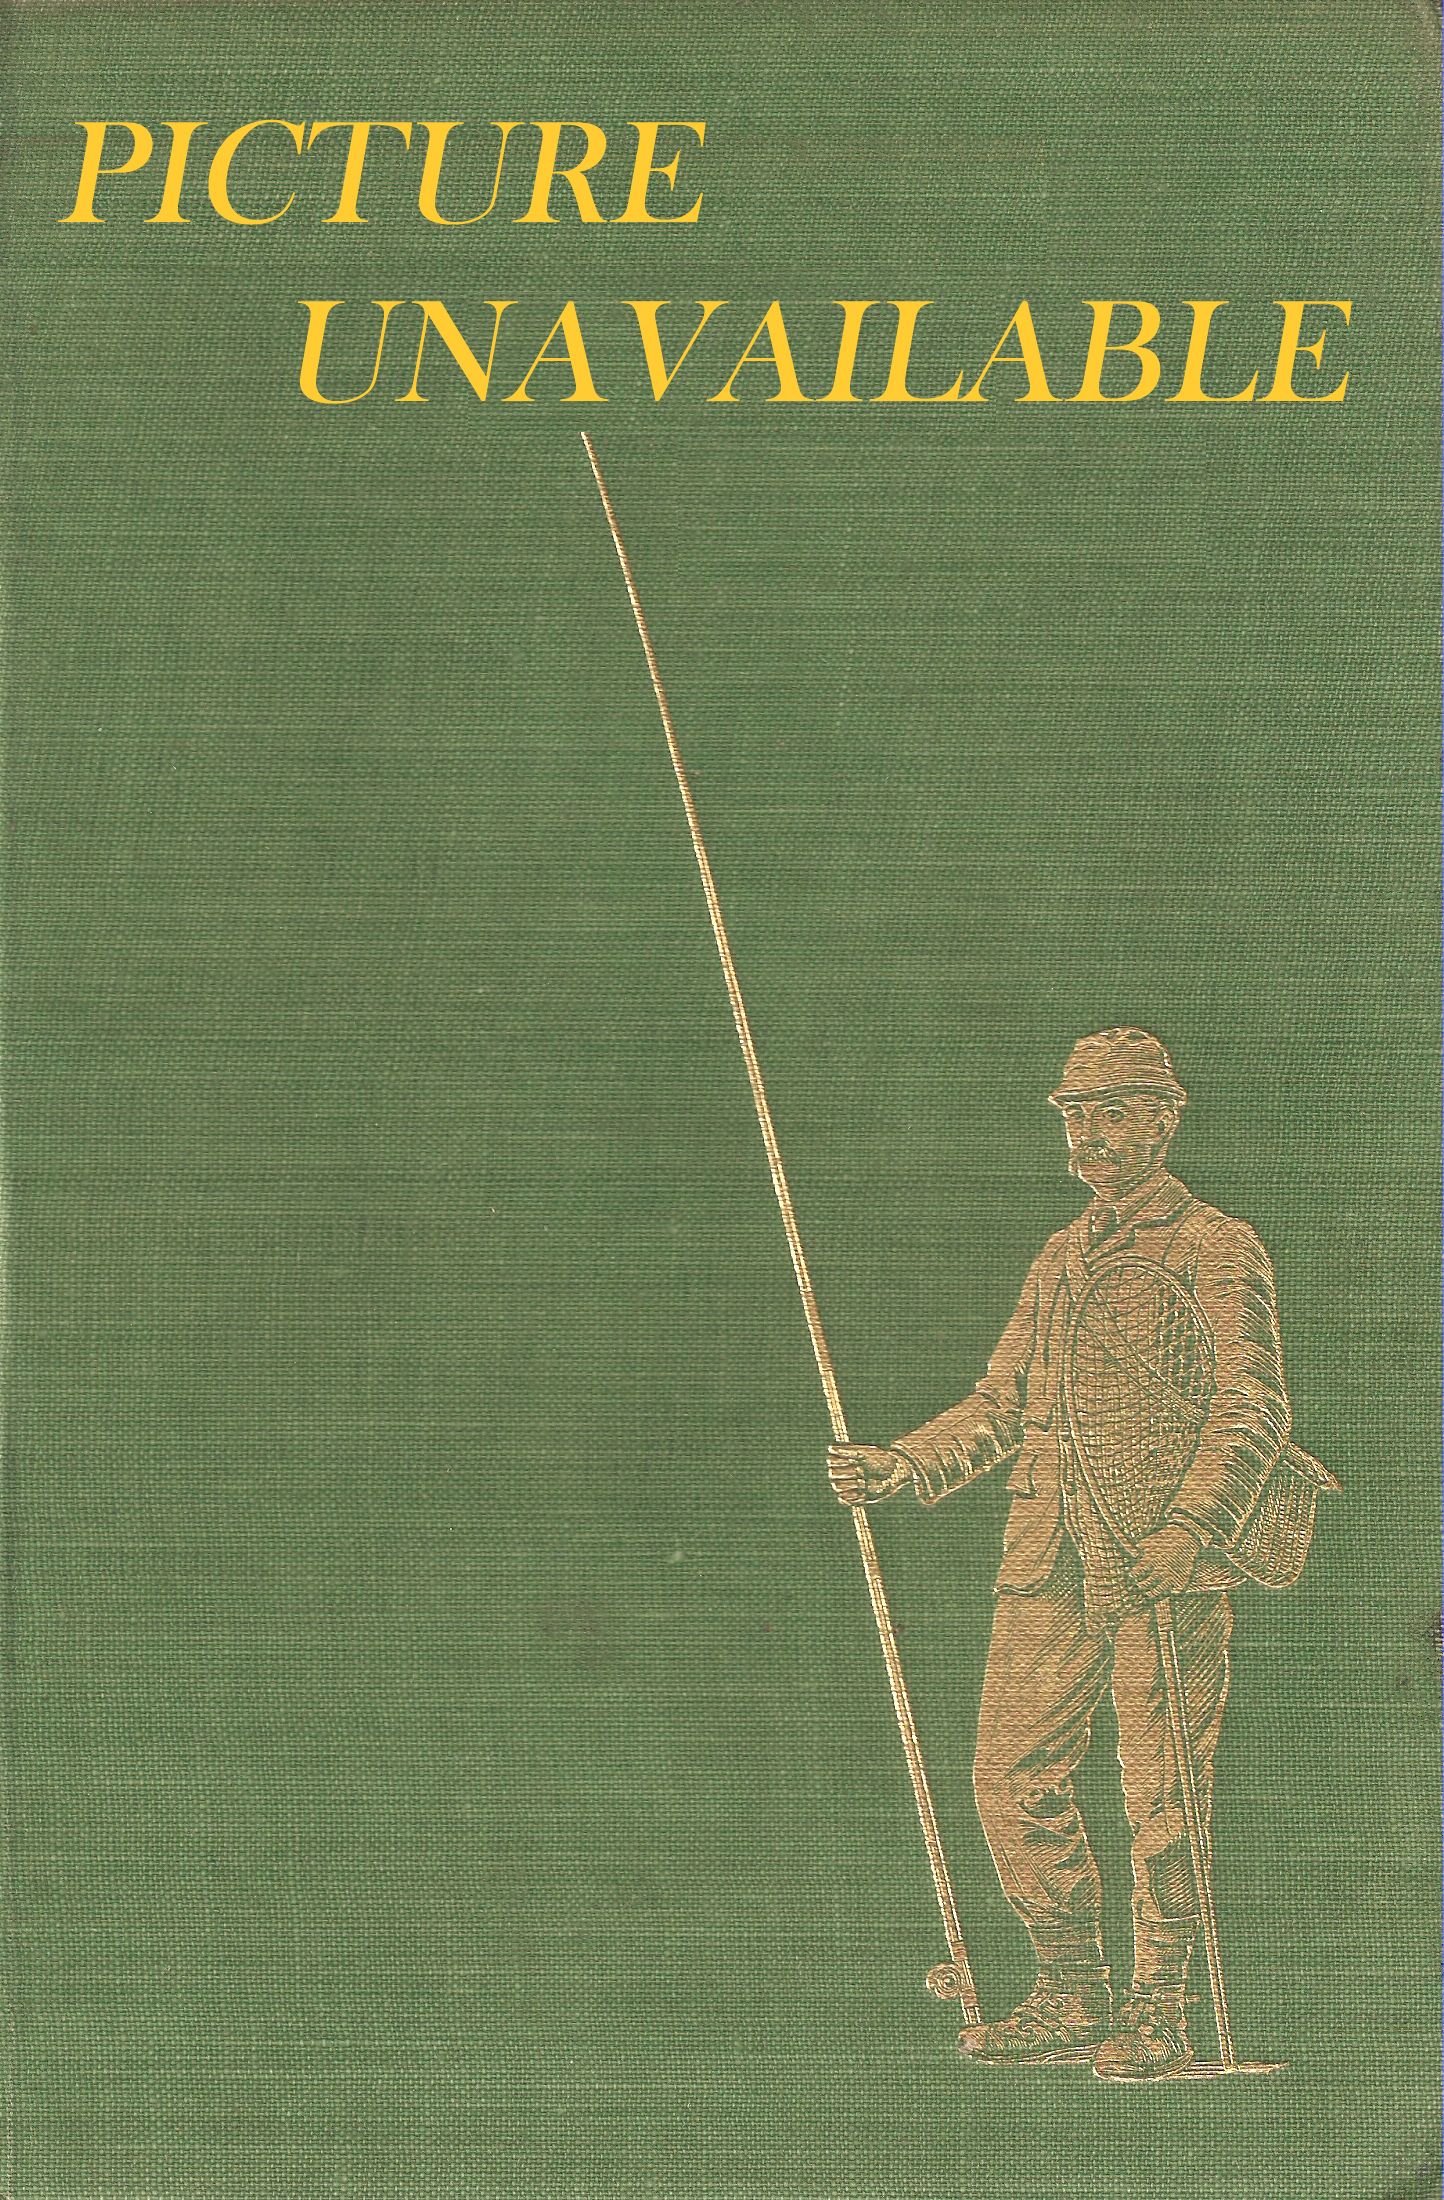 TYING AND FISHING THE NYMPH. By Taff Price. Hardback issue.